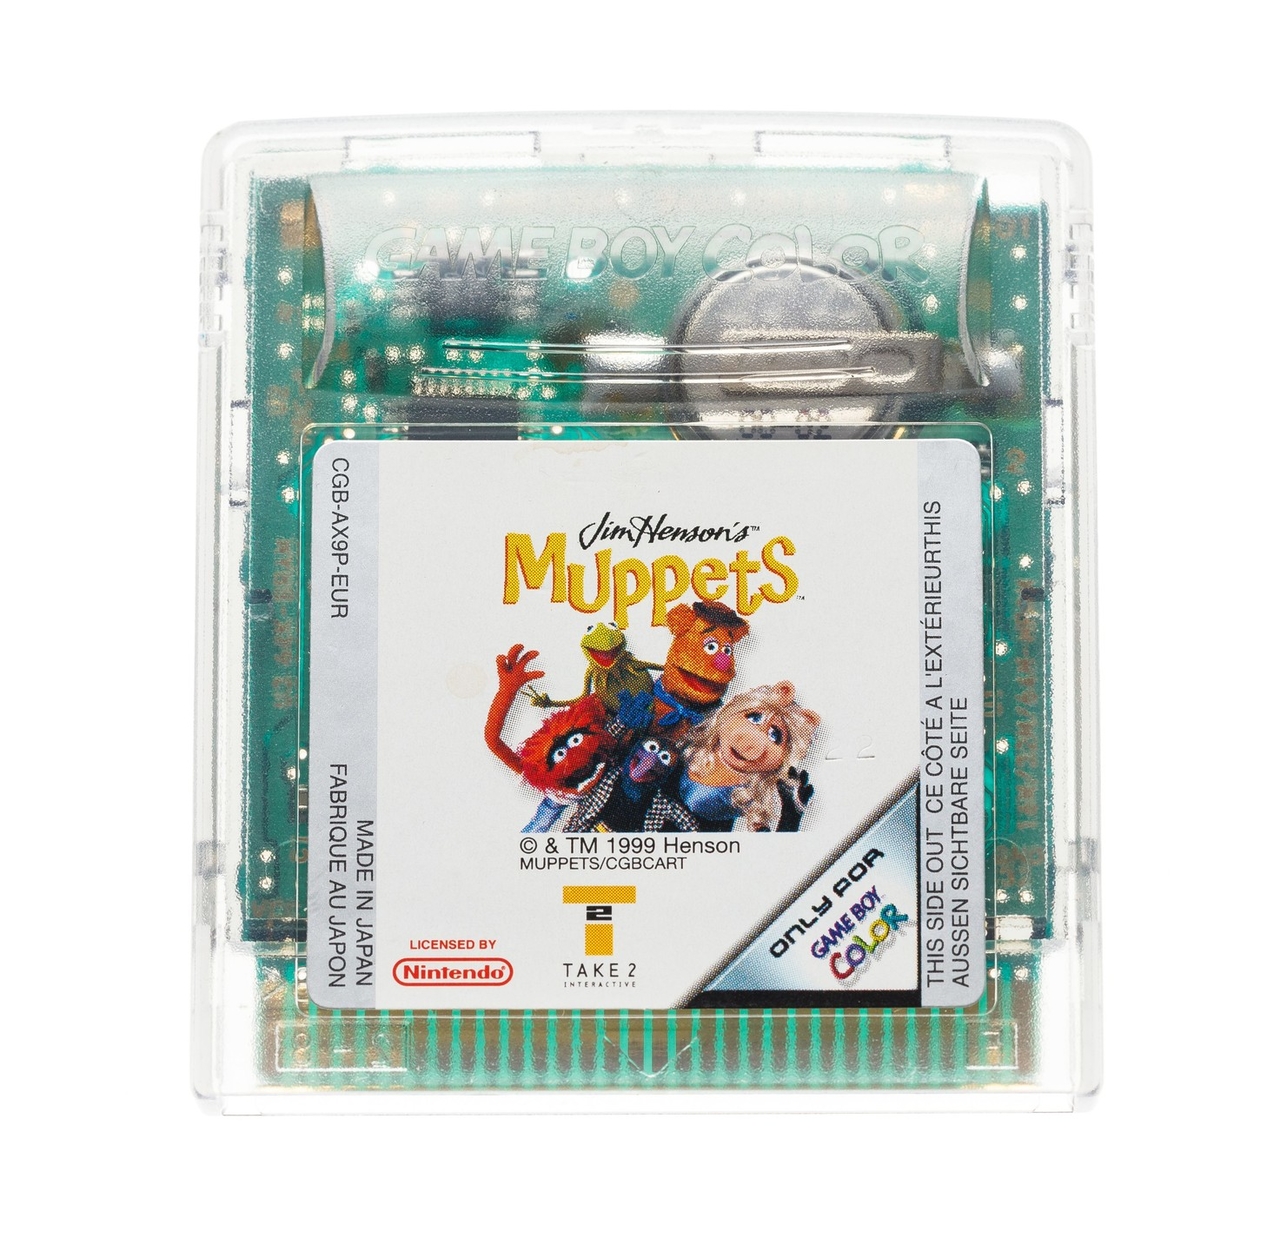 Jim Henson's The Muppets - Gameboy Color Games